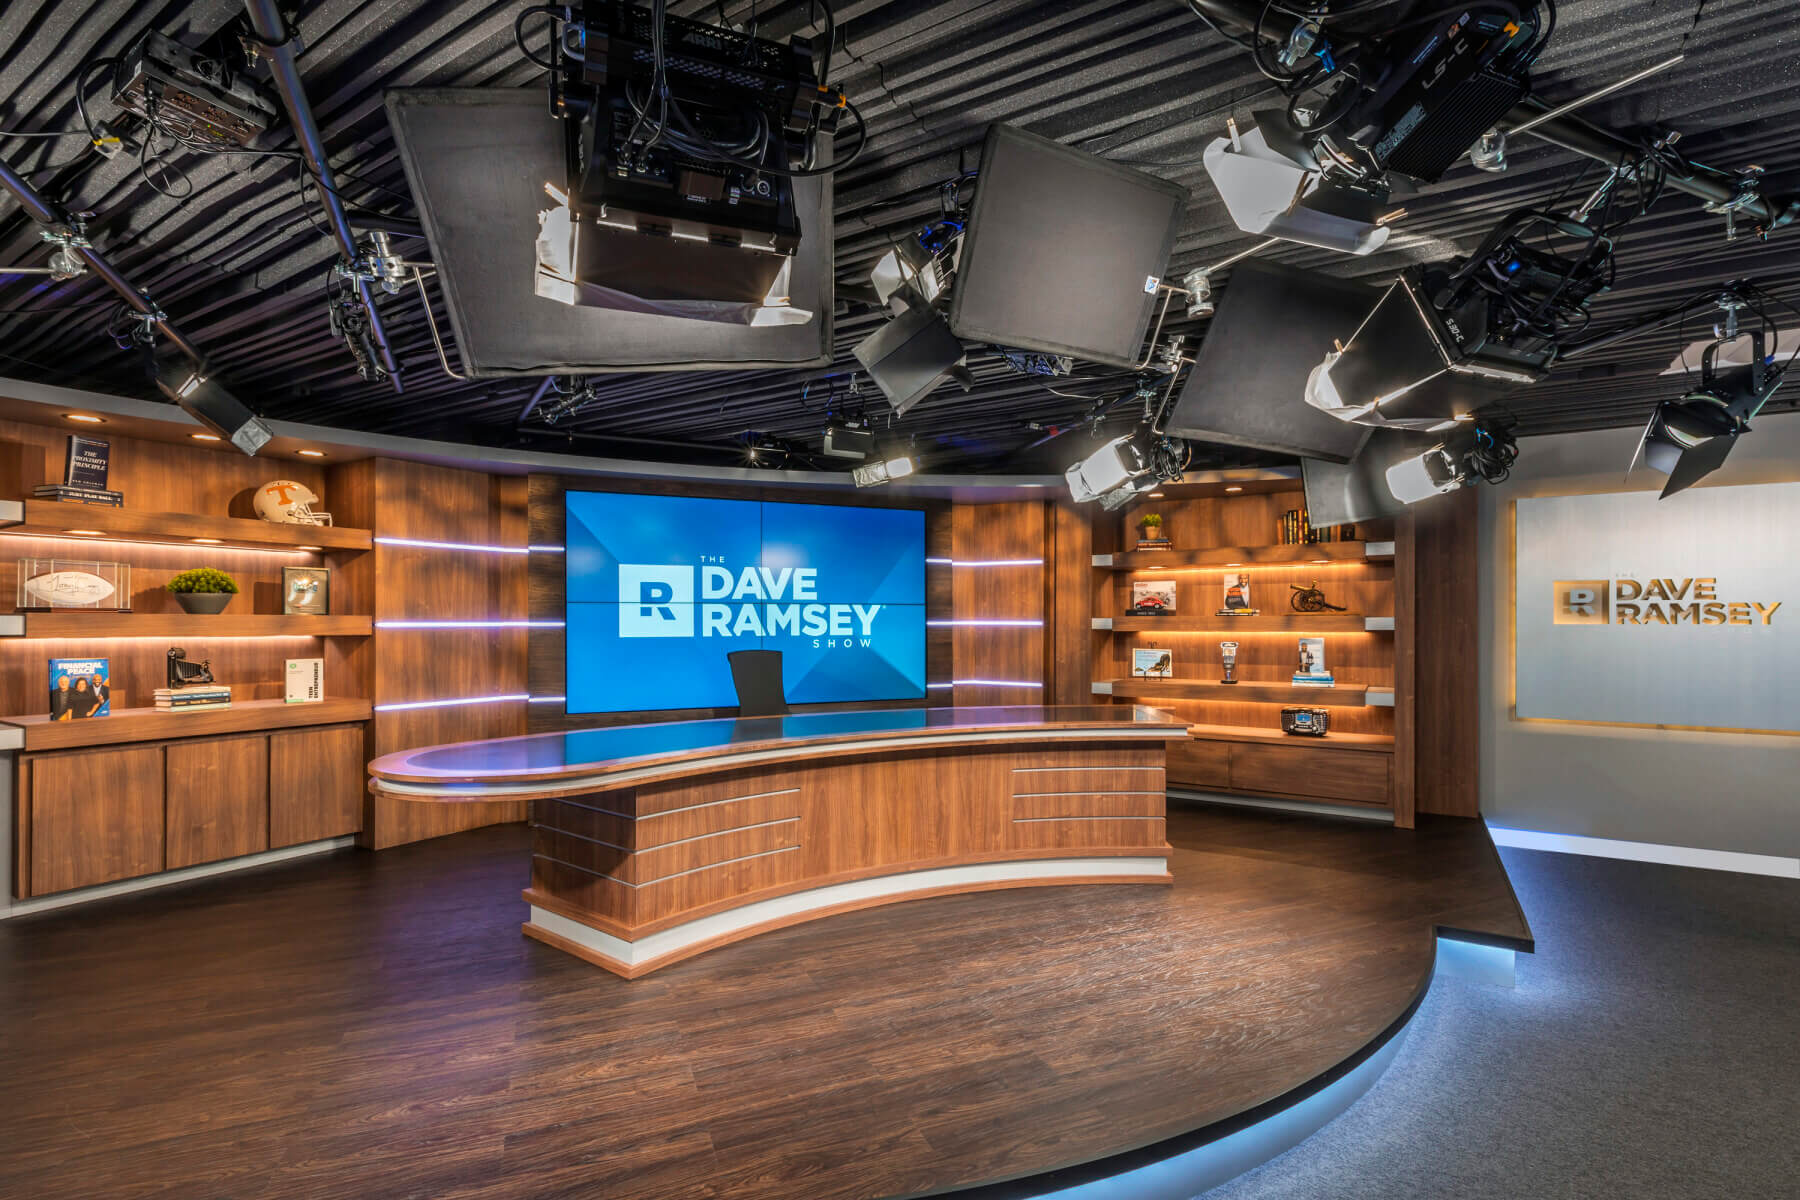 The Dave Ramsey show studio at the Ramsey Solutions headquarters building